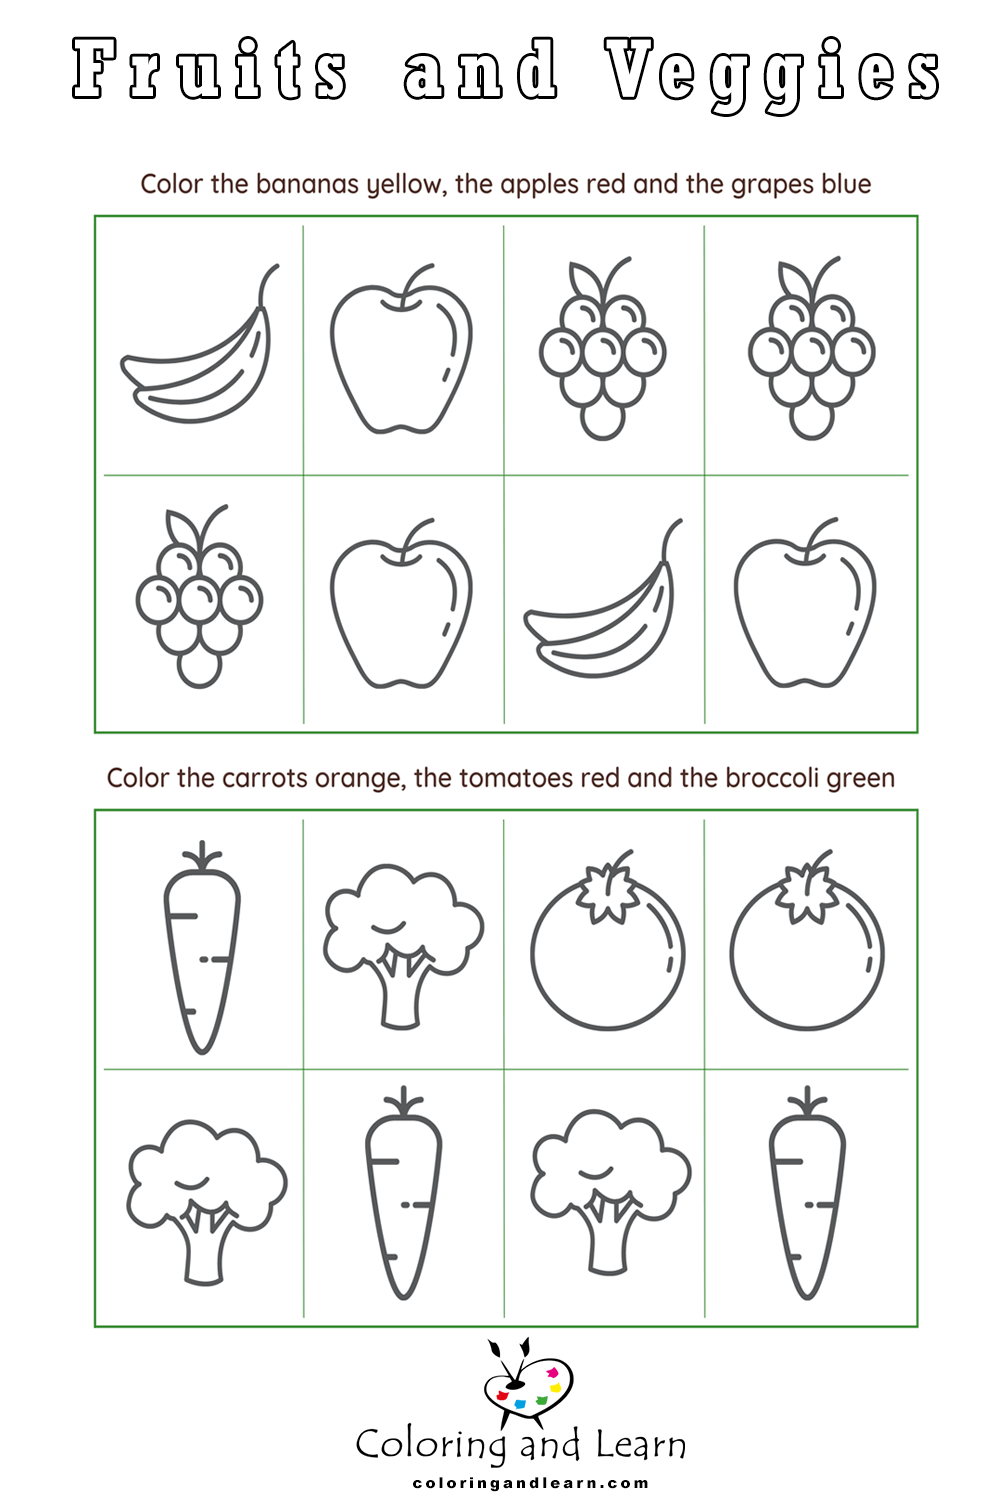 Preschool fruit and veggies coloring pages